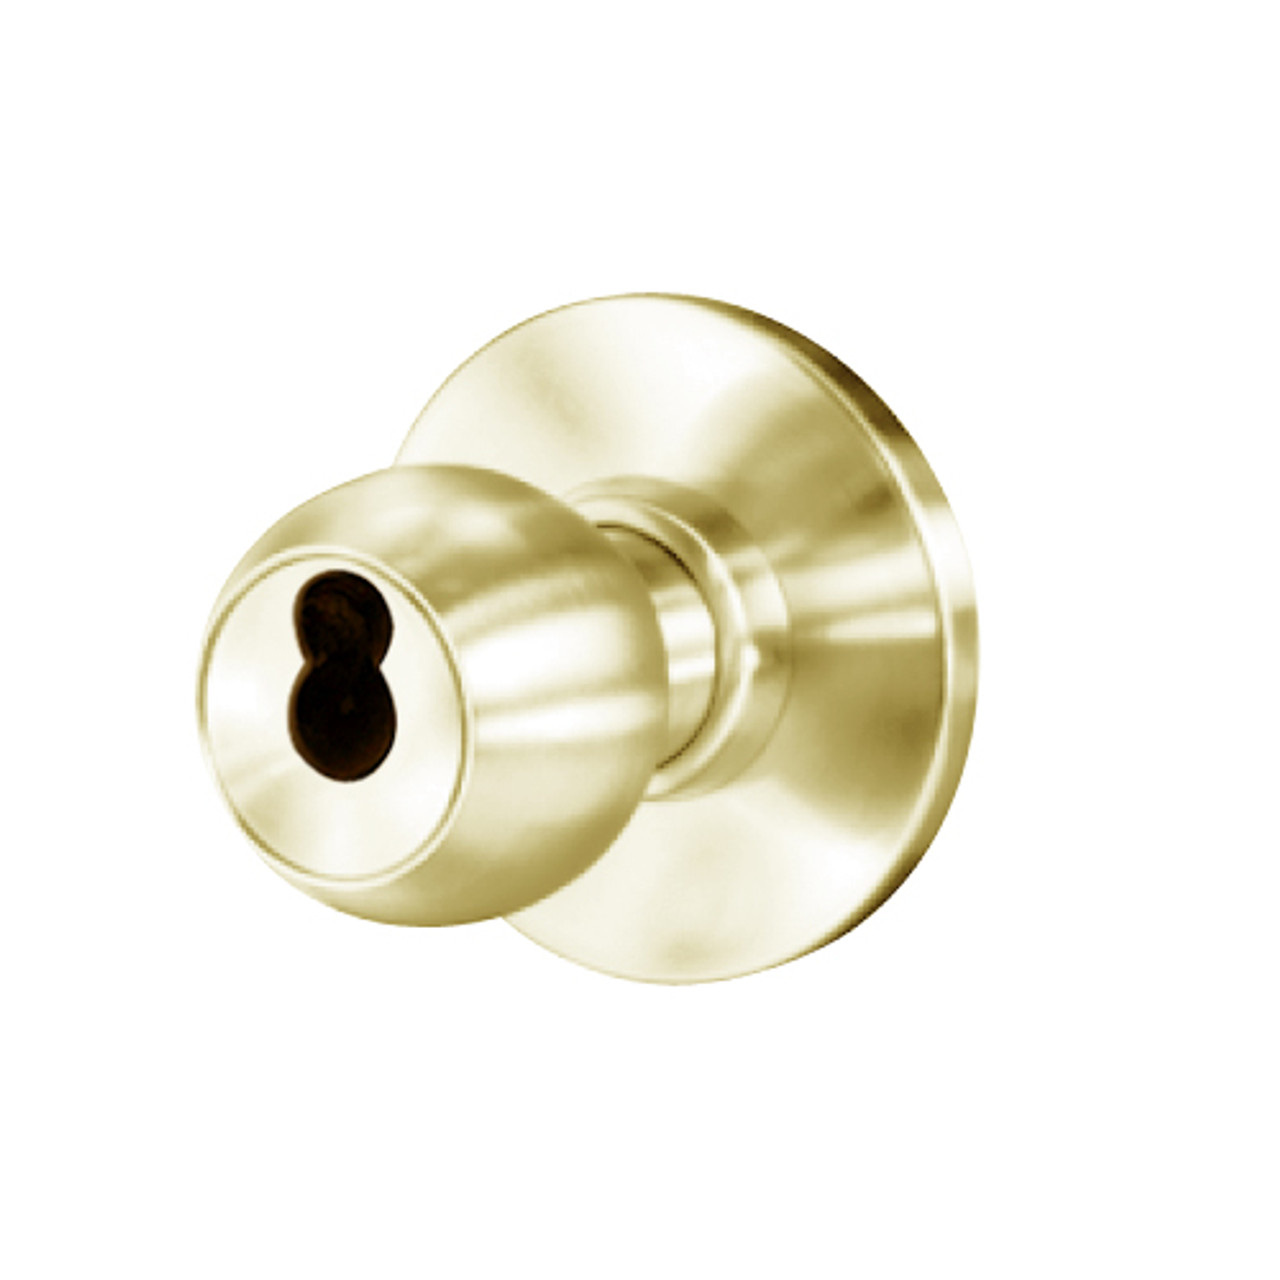 8K37XR4AS3606 Best 8K Series Special Heavy Duty Cylindrical Knob Locks with Round Style in Satin Brass